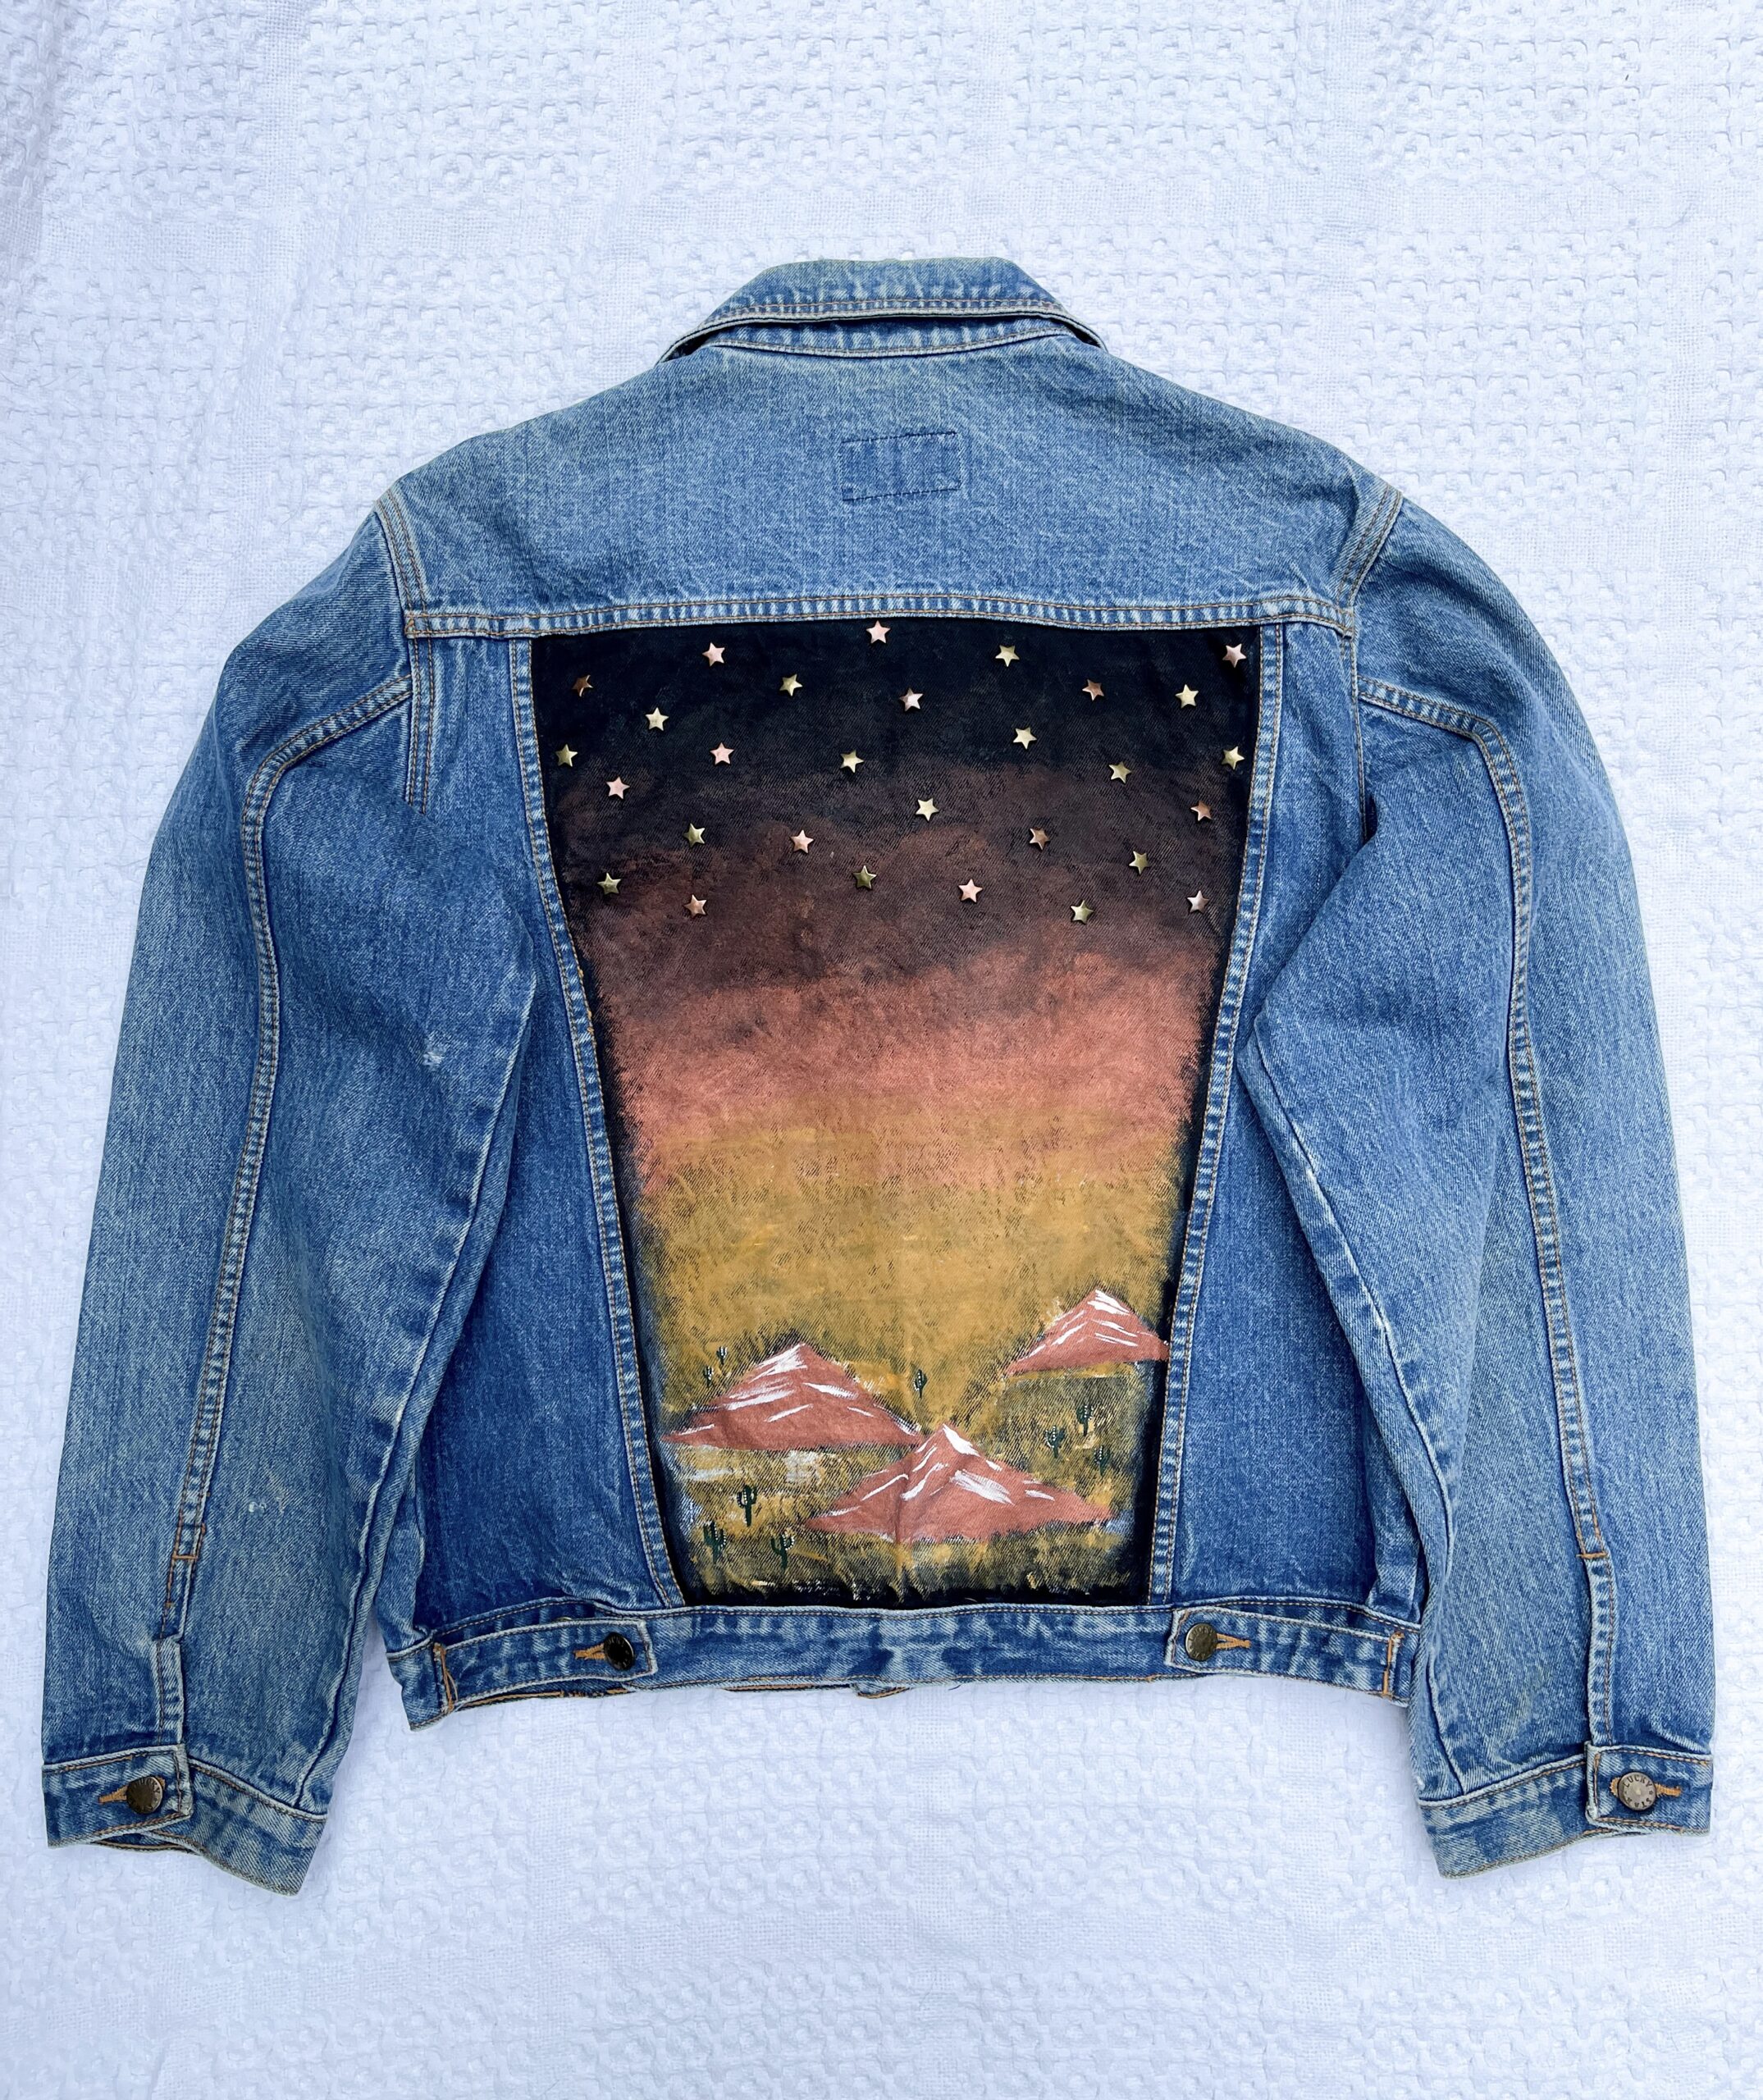 A denim jacket with a painting on the back.